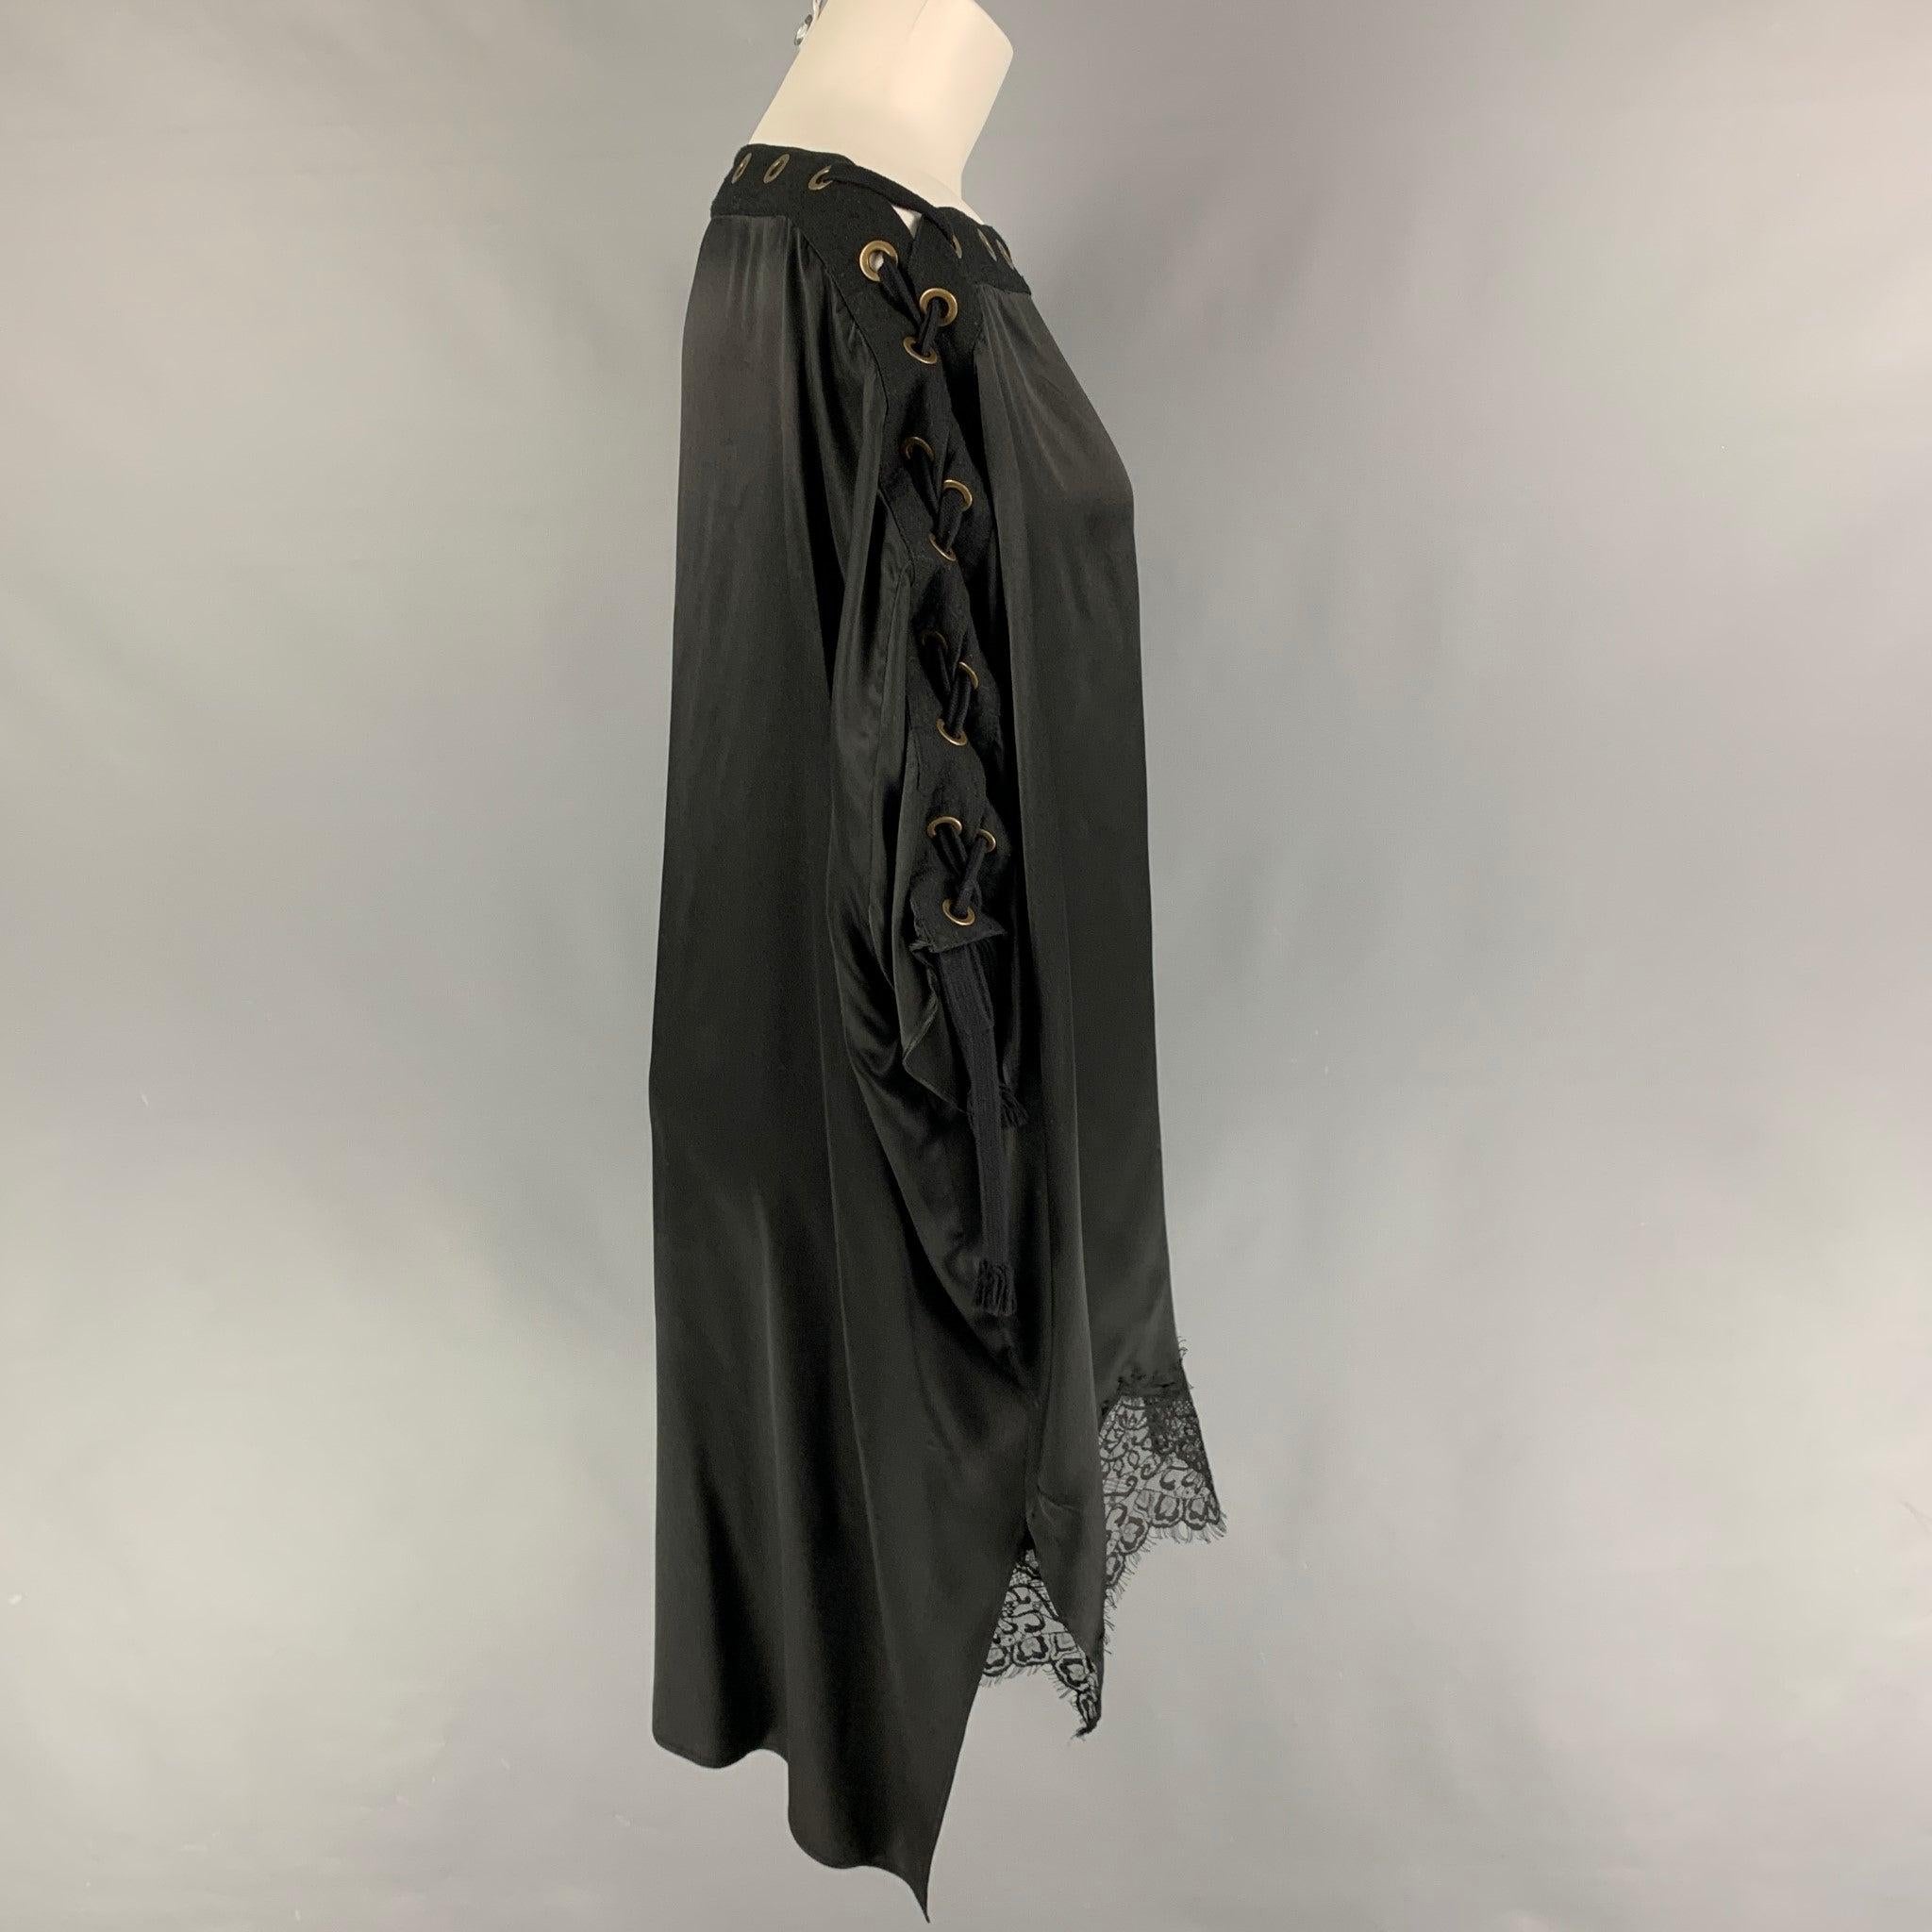 FAITH CONNEXION dress top comes in a black silk featuring a oversized fit, grommet details, tie up design, and a lace trim.
Very Good
Pre-Owned Condition. 

Marked:   S 

Measurements: 
 
Shoulder: 25 inches  Bust: 60 inches  
Sleeve: 9.5 inches 